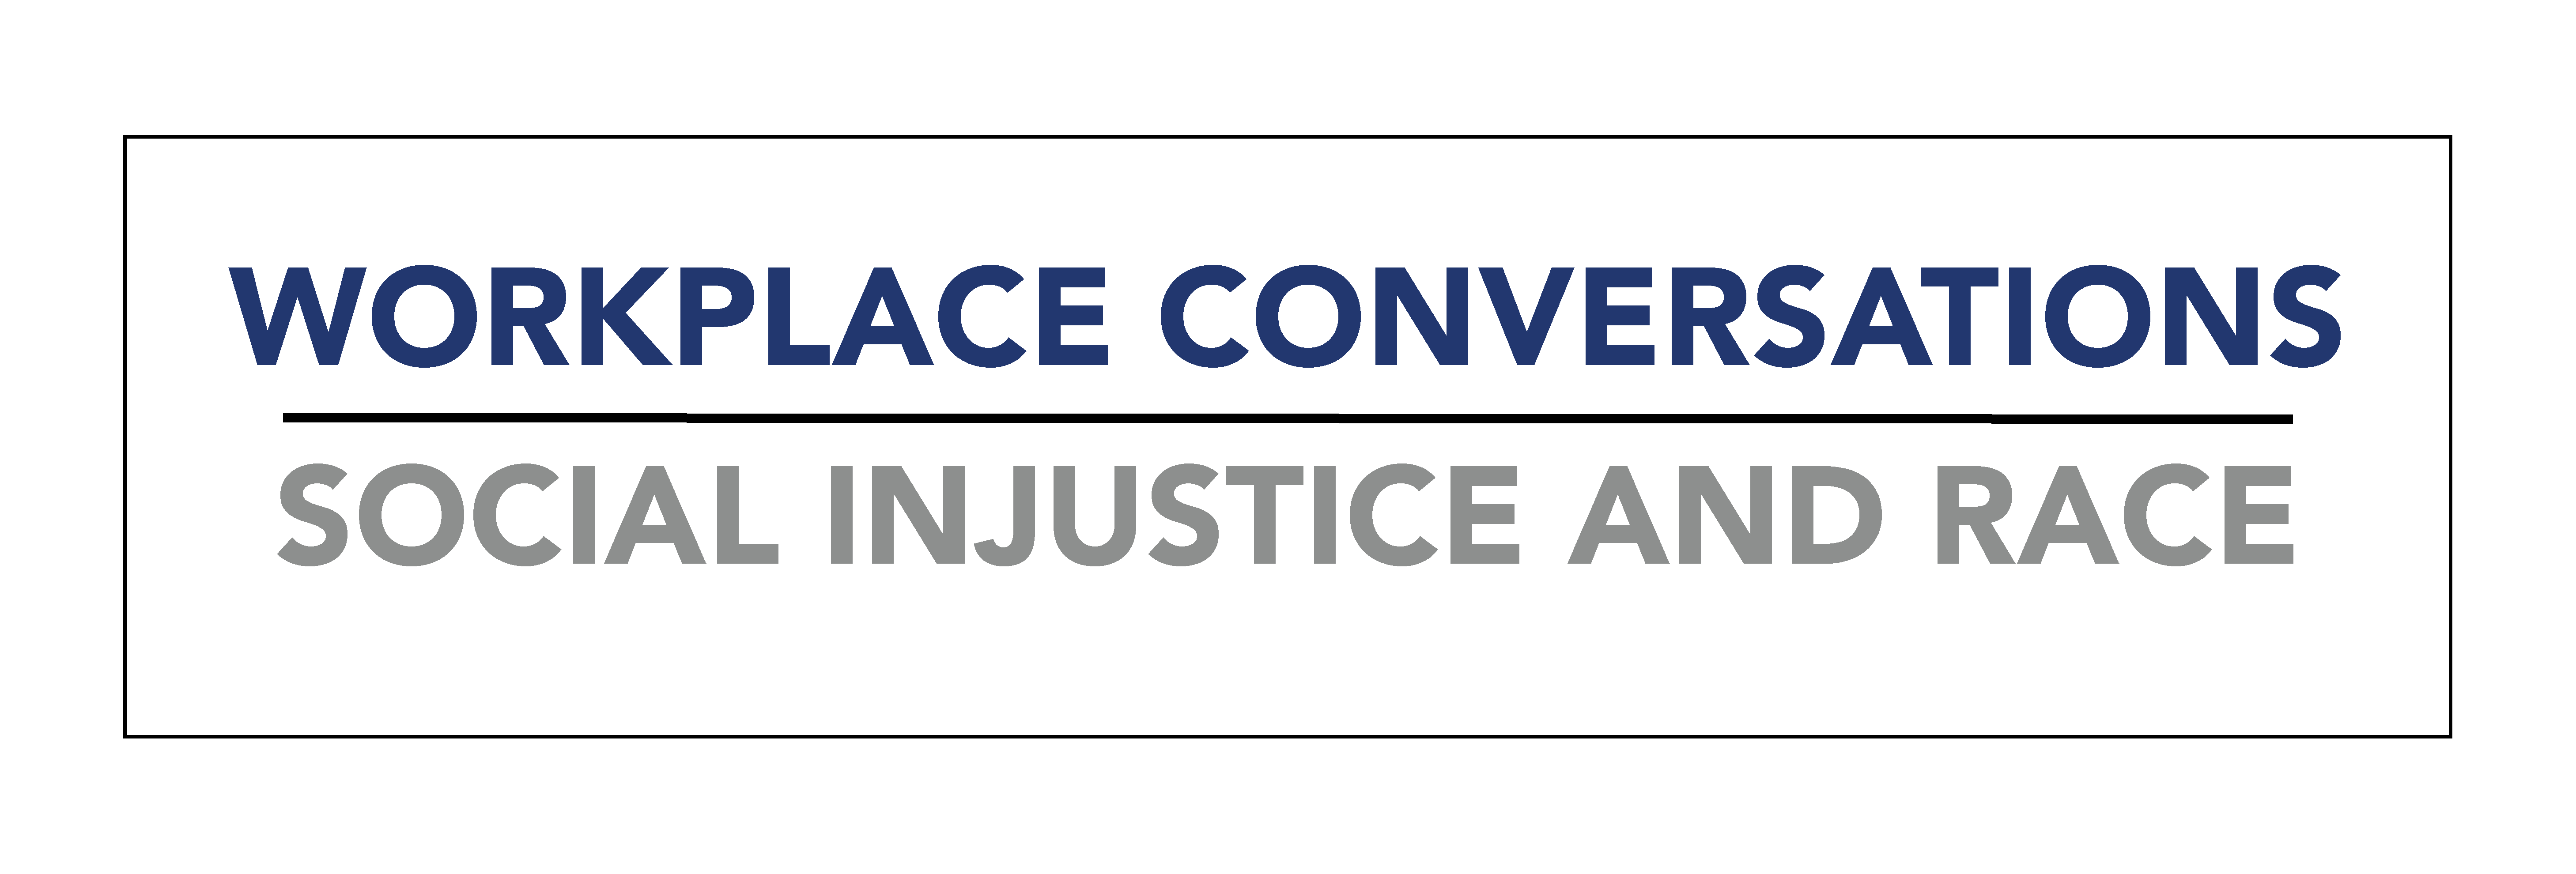 Workplace Conversations about Social Injustice and Race